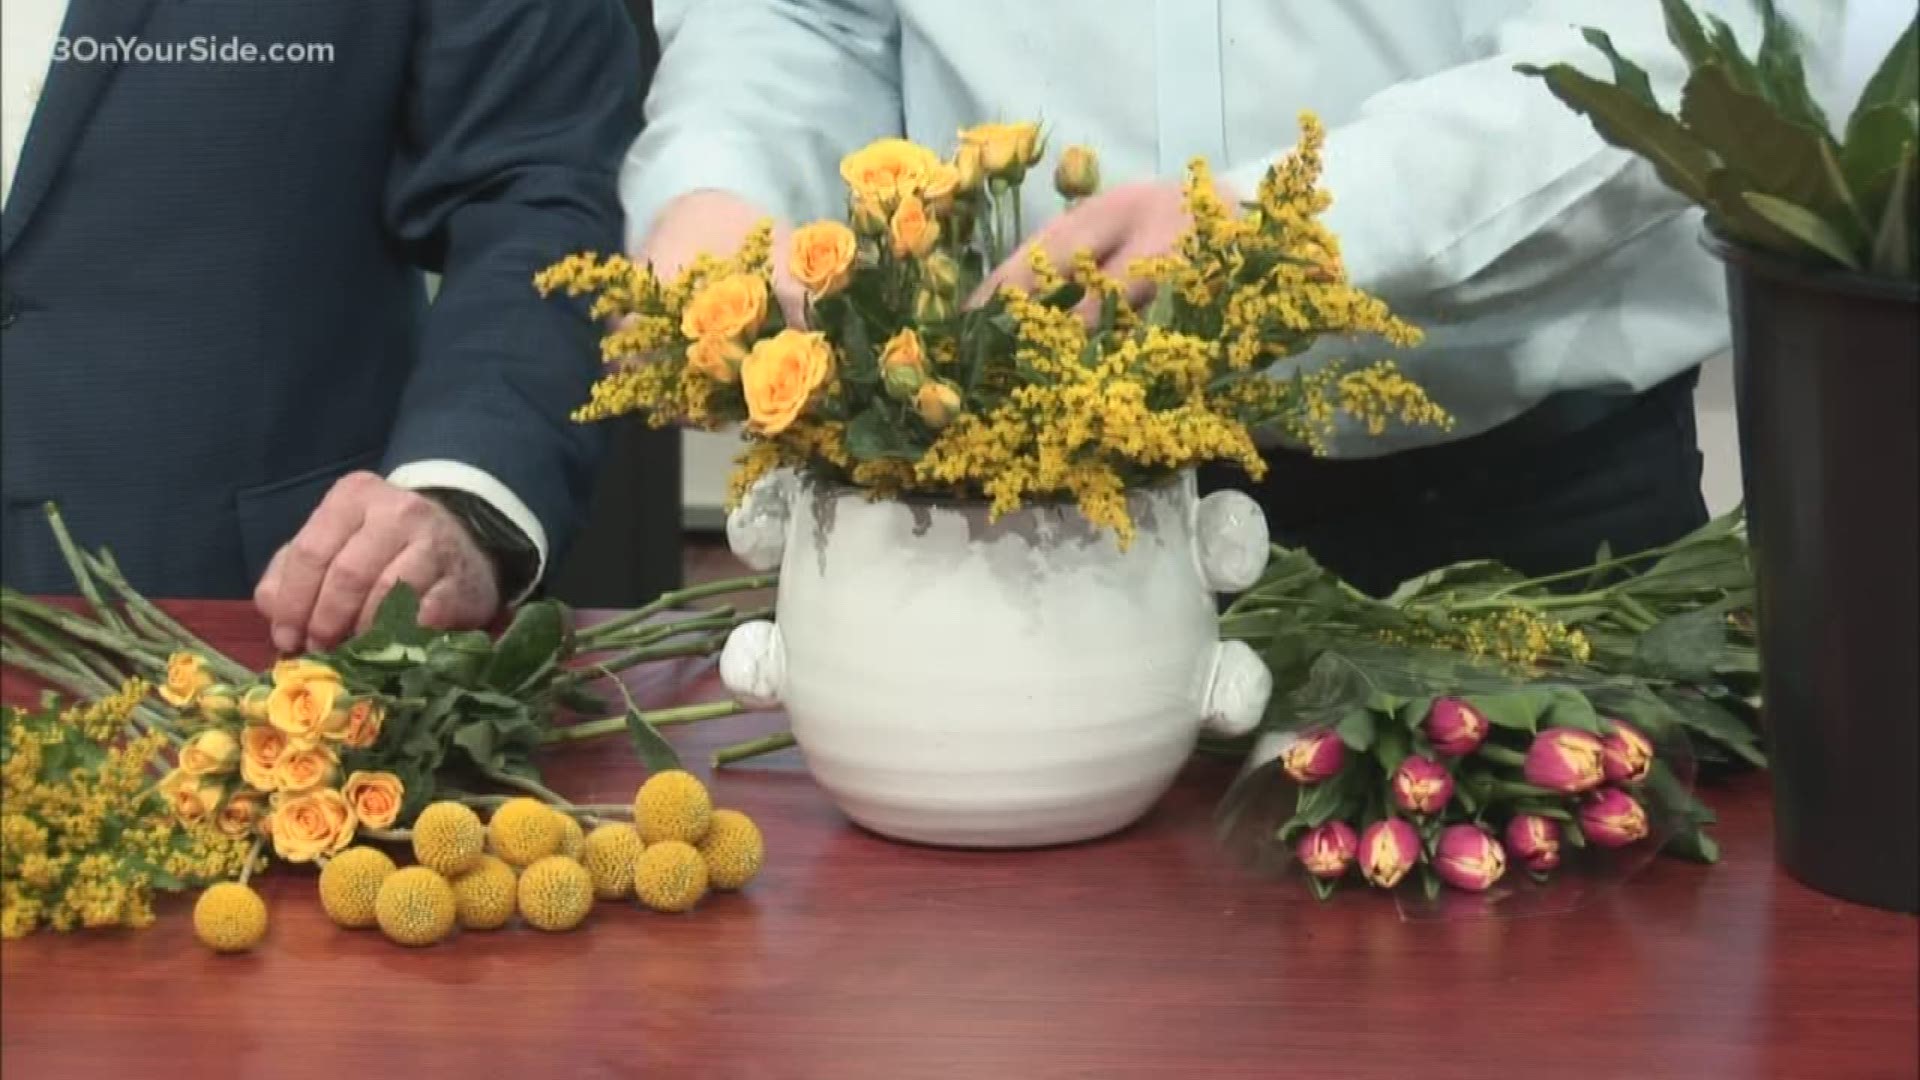 J Schwanke from uBloom.com reminds us that these long lasting flowers can be part of our lives all the time. He shares some ways to use tulips in your yearly decor, in the garden and more.